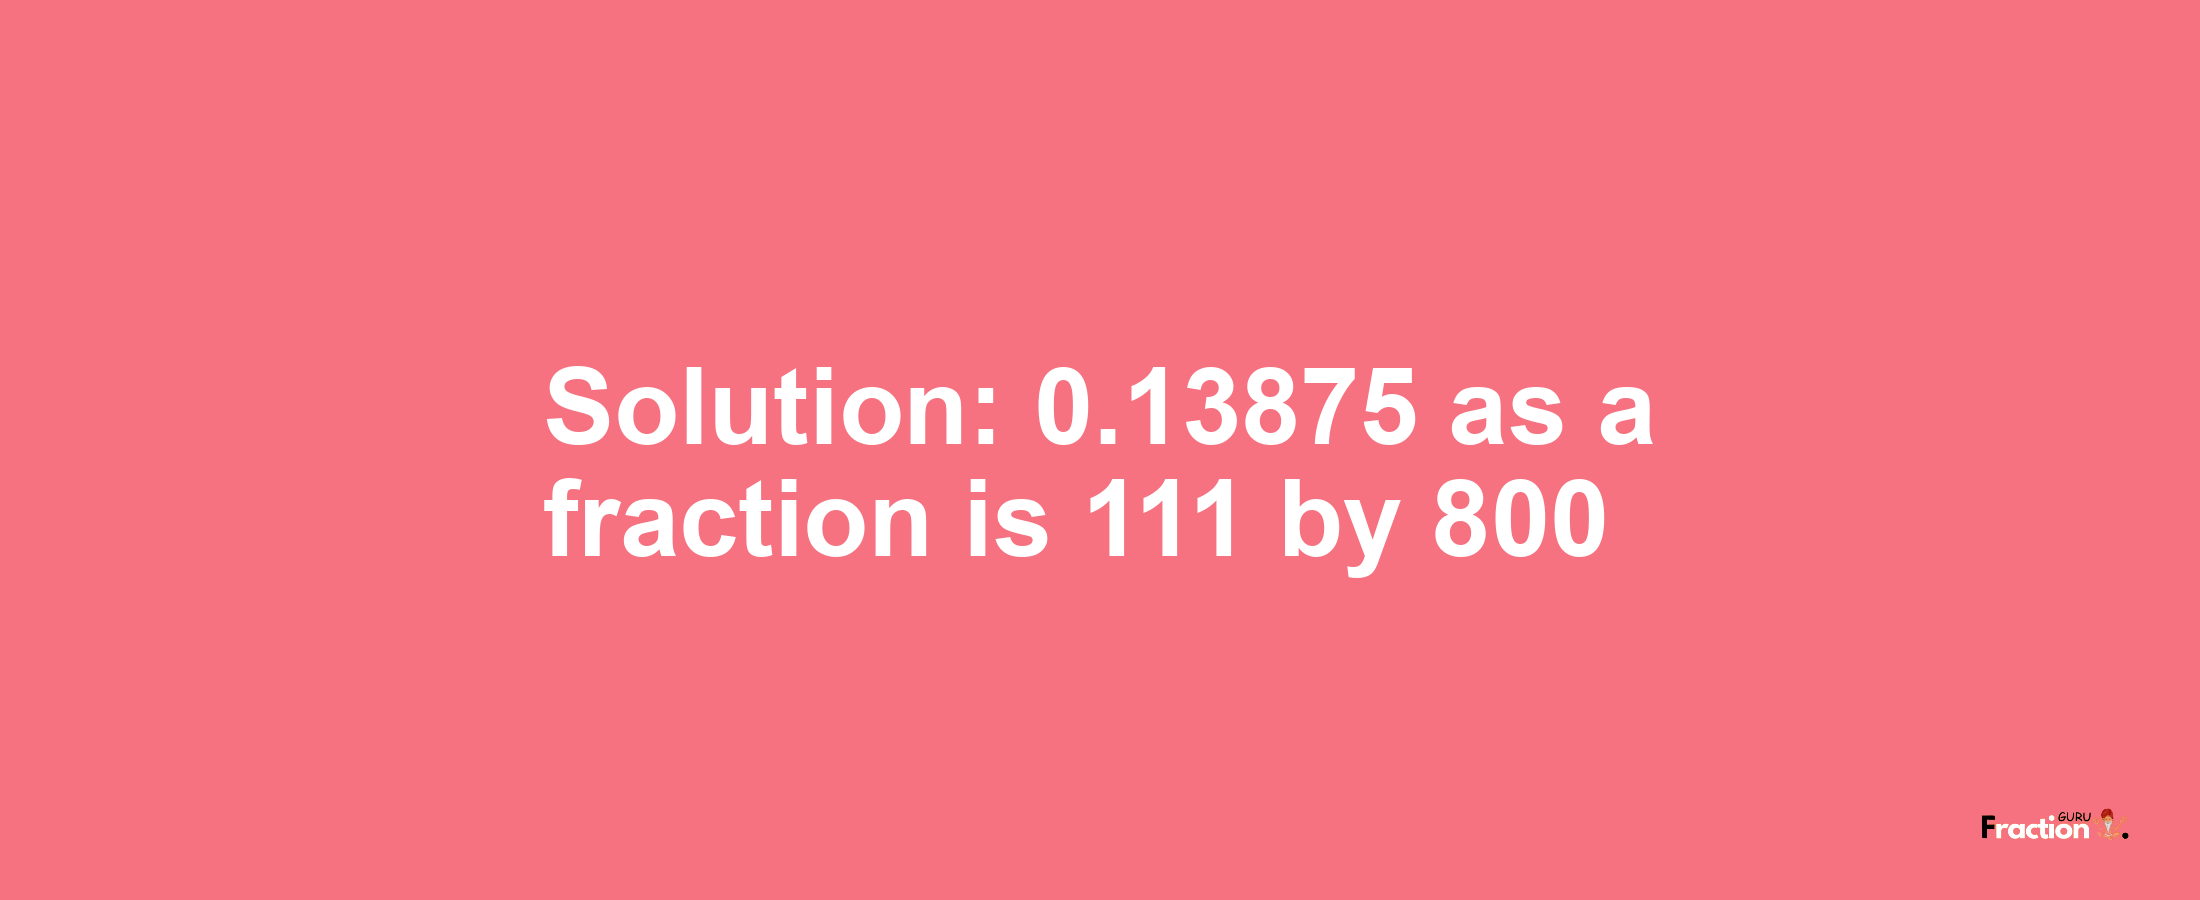 Solution:0.13875 as a fraction is 111/800